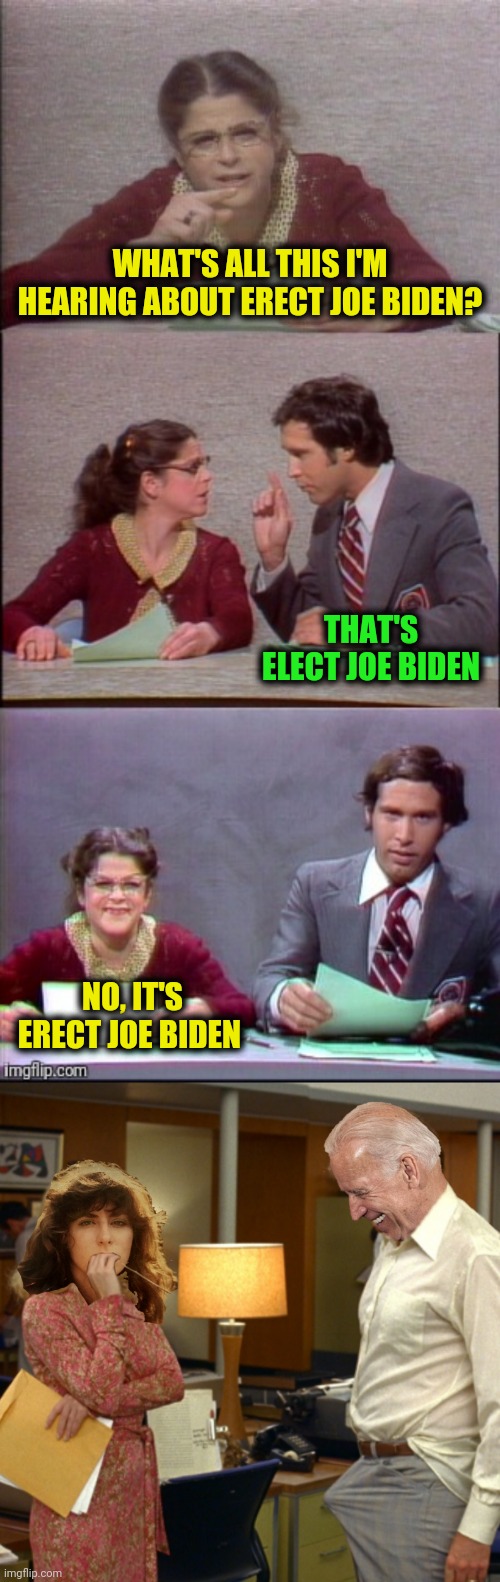 WHAT'S ALL THIS I'M HEARING ABOUT ERECT JOE BIDEN? NO, IT'S ERECT JOE BIDEN THAT'S ELECT JOE BIDEN | made w/ Imgflip meme maker